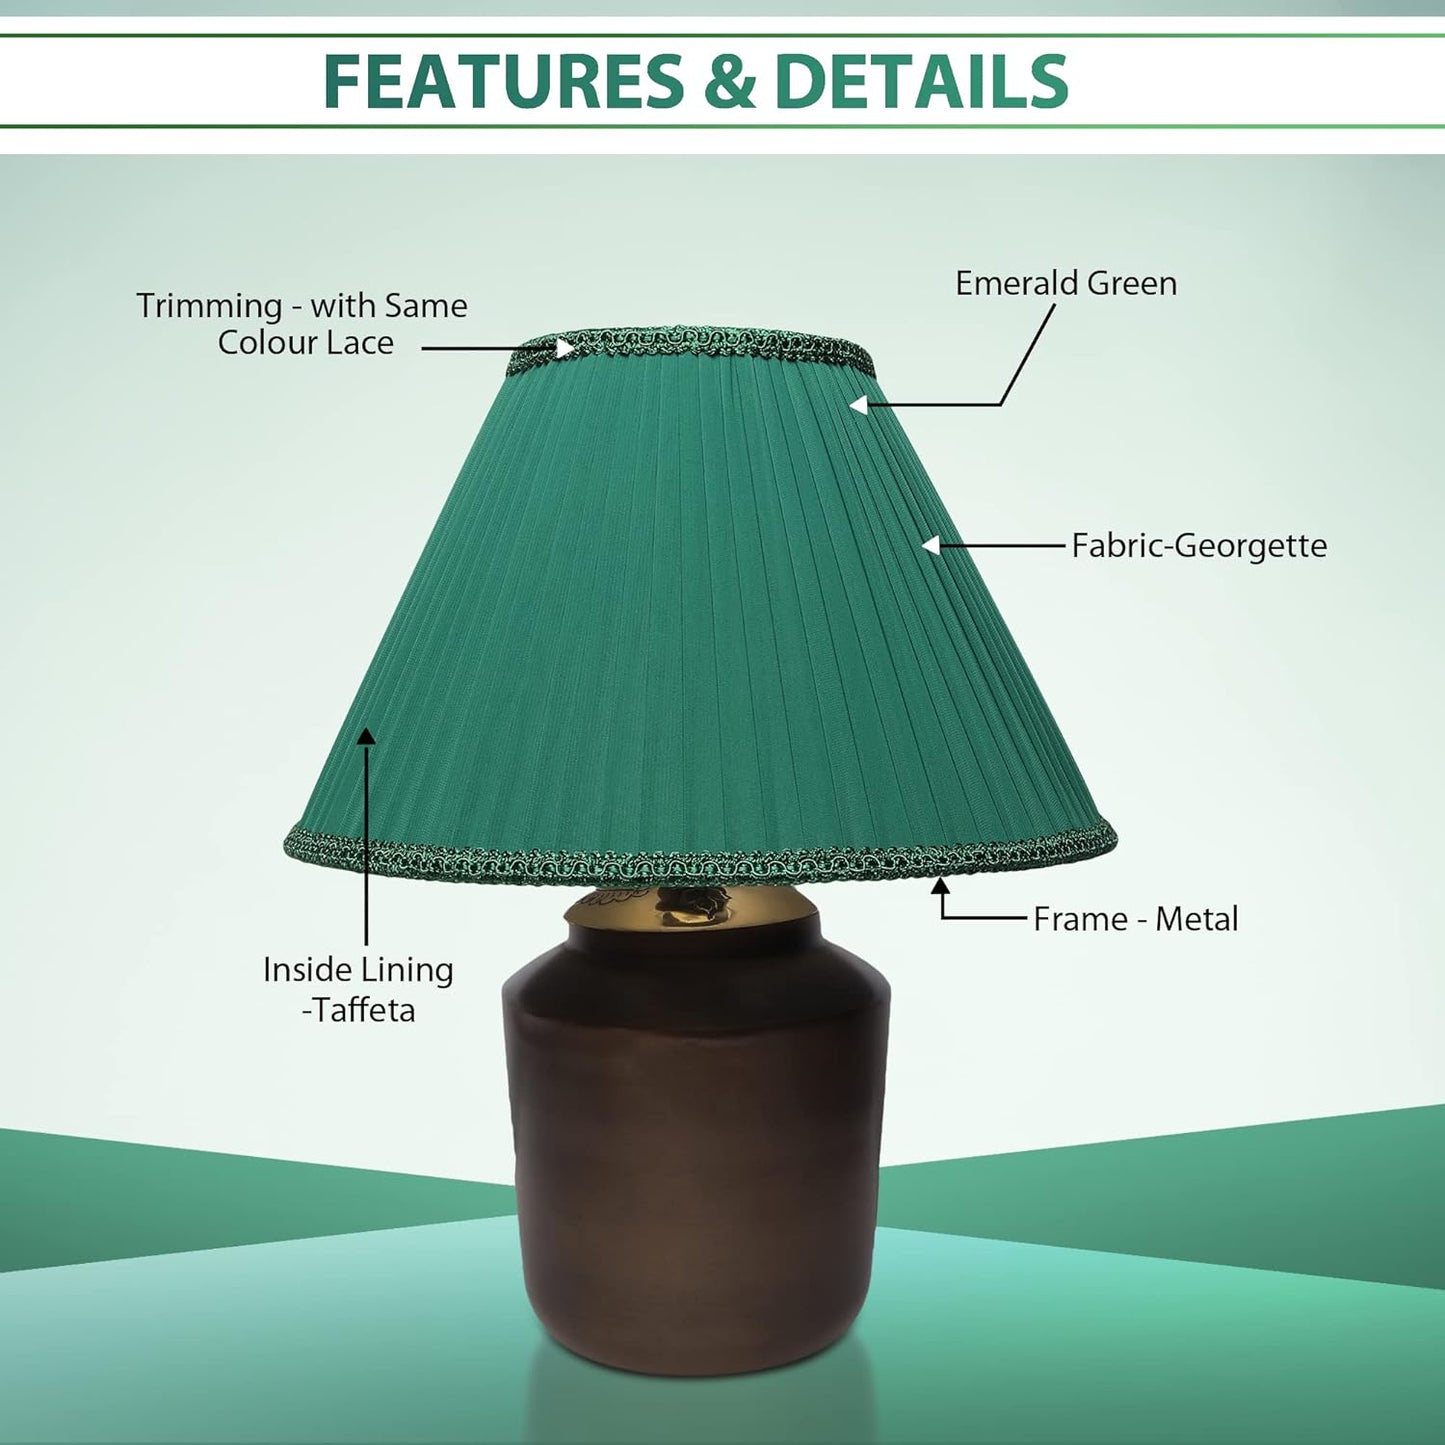 Georgette Pleated Lampshade with Lace Trim in Emerald Green